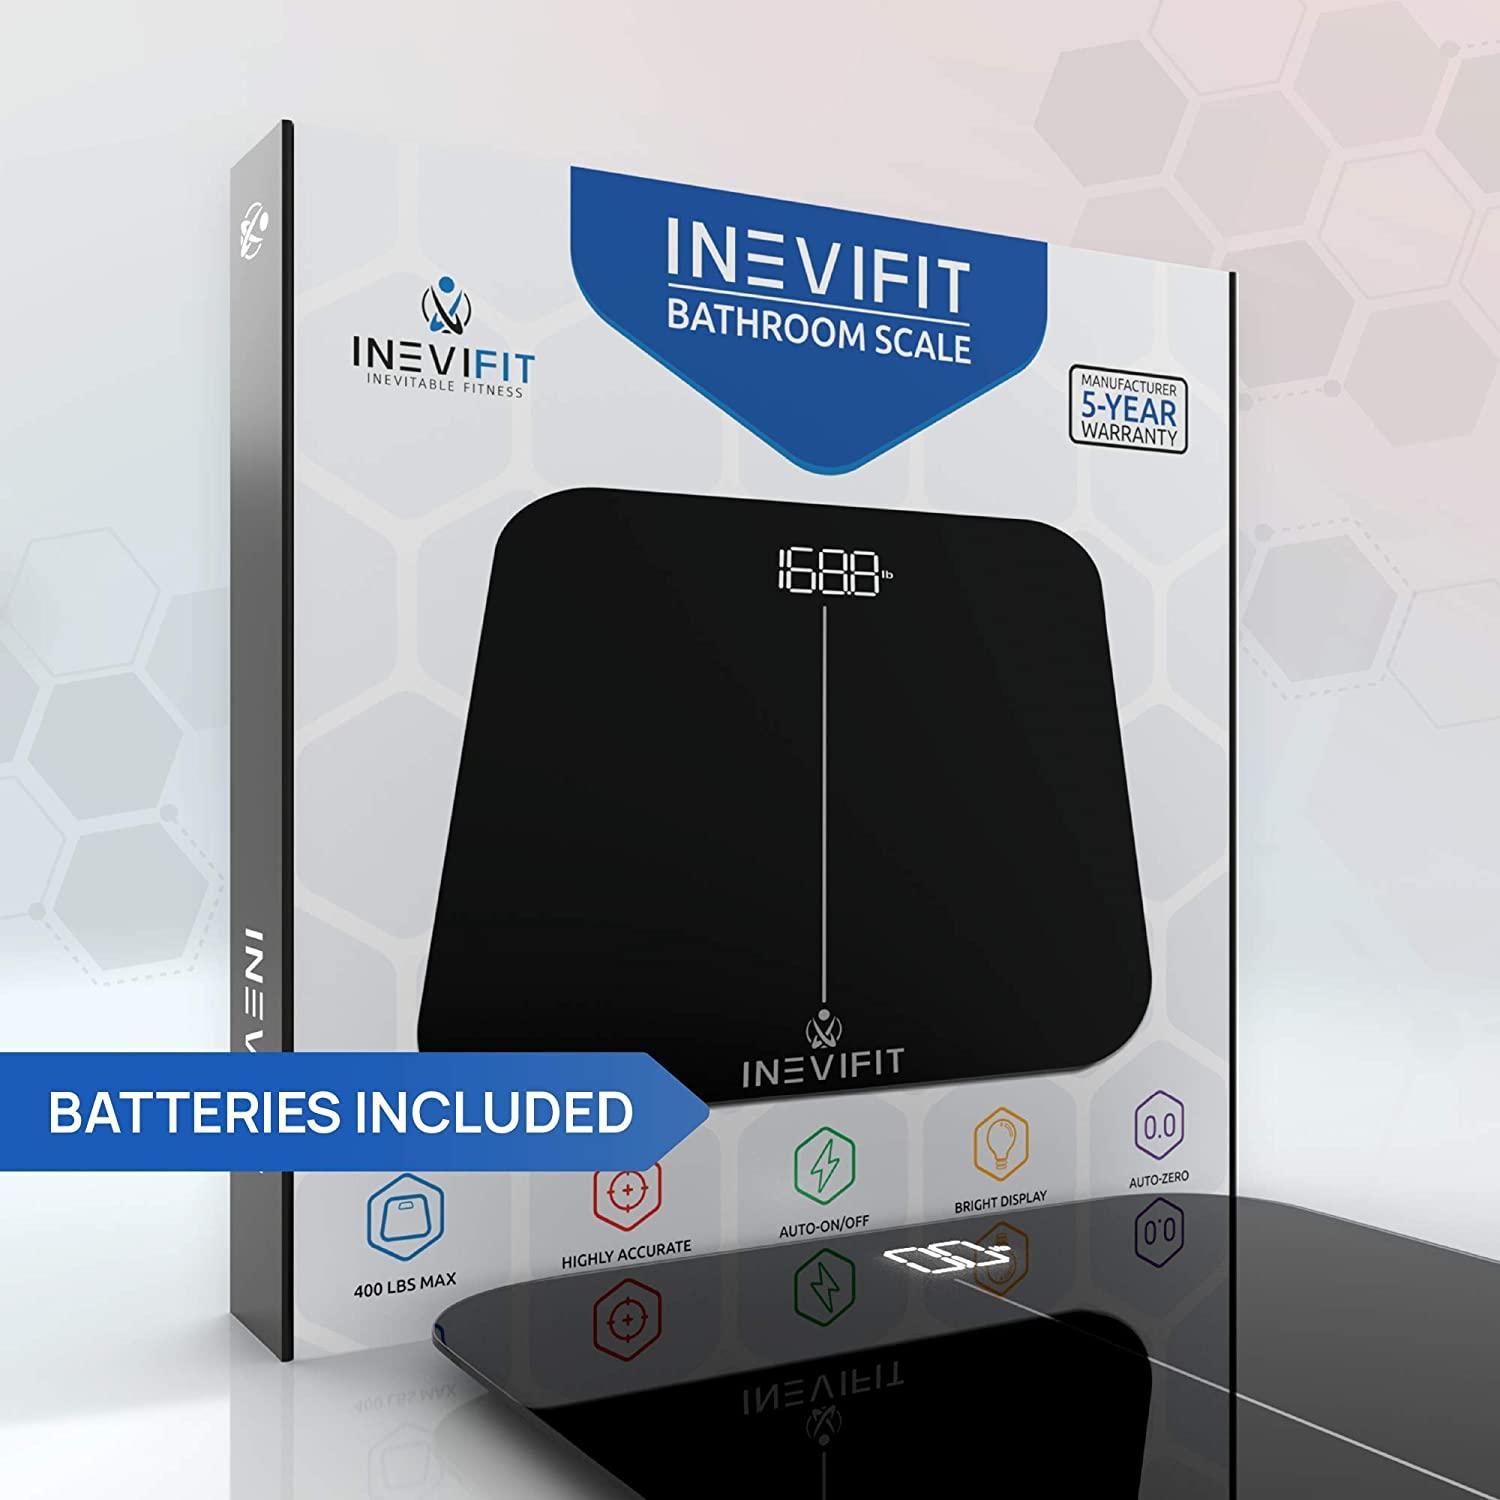 INEVIFIT Bathroom Scale, Highly Accurate Digital Bathroom Body Scale,  Measures Weight for Multiple Users. Includes a 5-Year Warranty - Goshmart